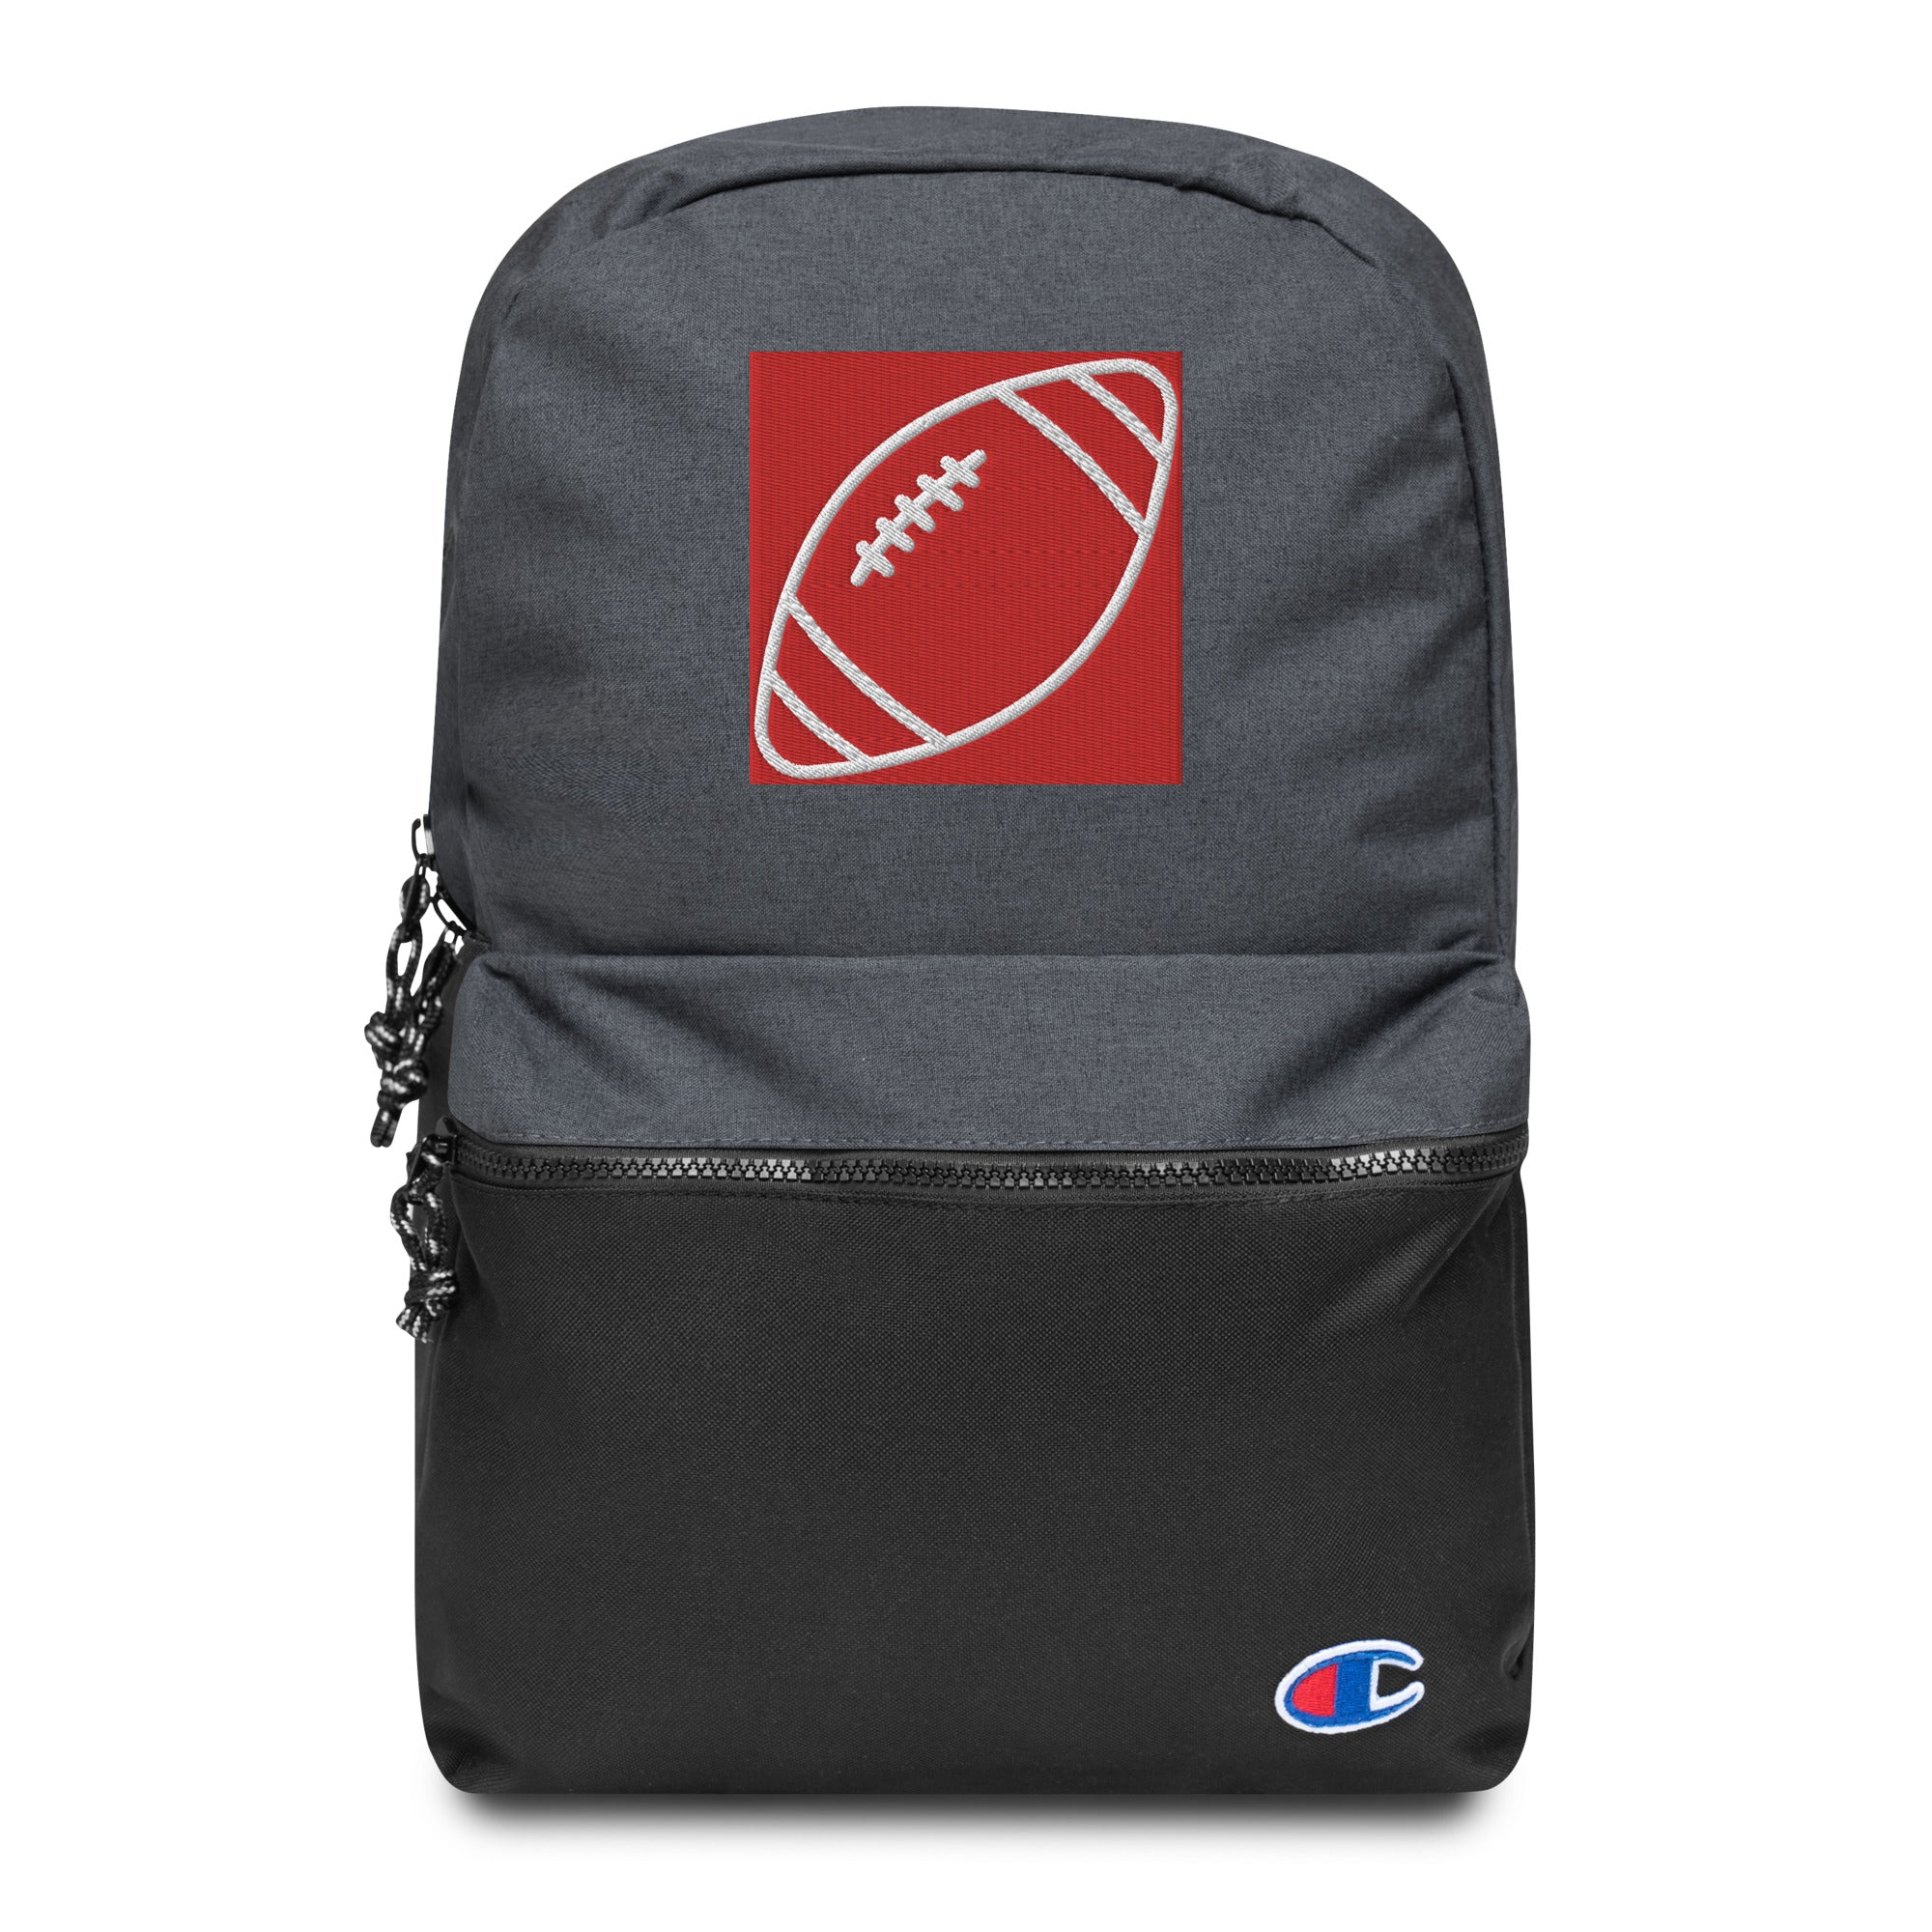 Back To School, Embroidered Football, Champion Backpack, College, University, Teens, Kids, Camping